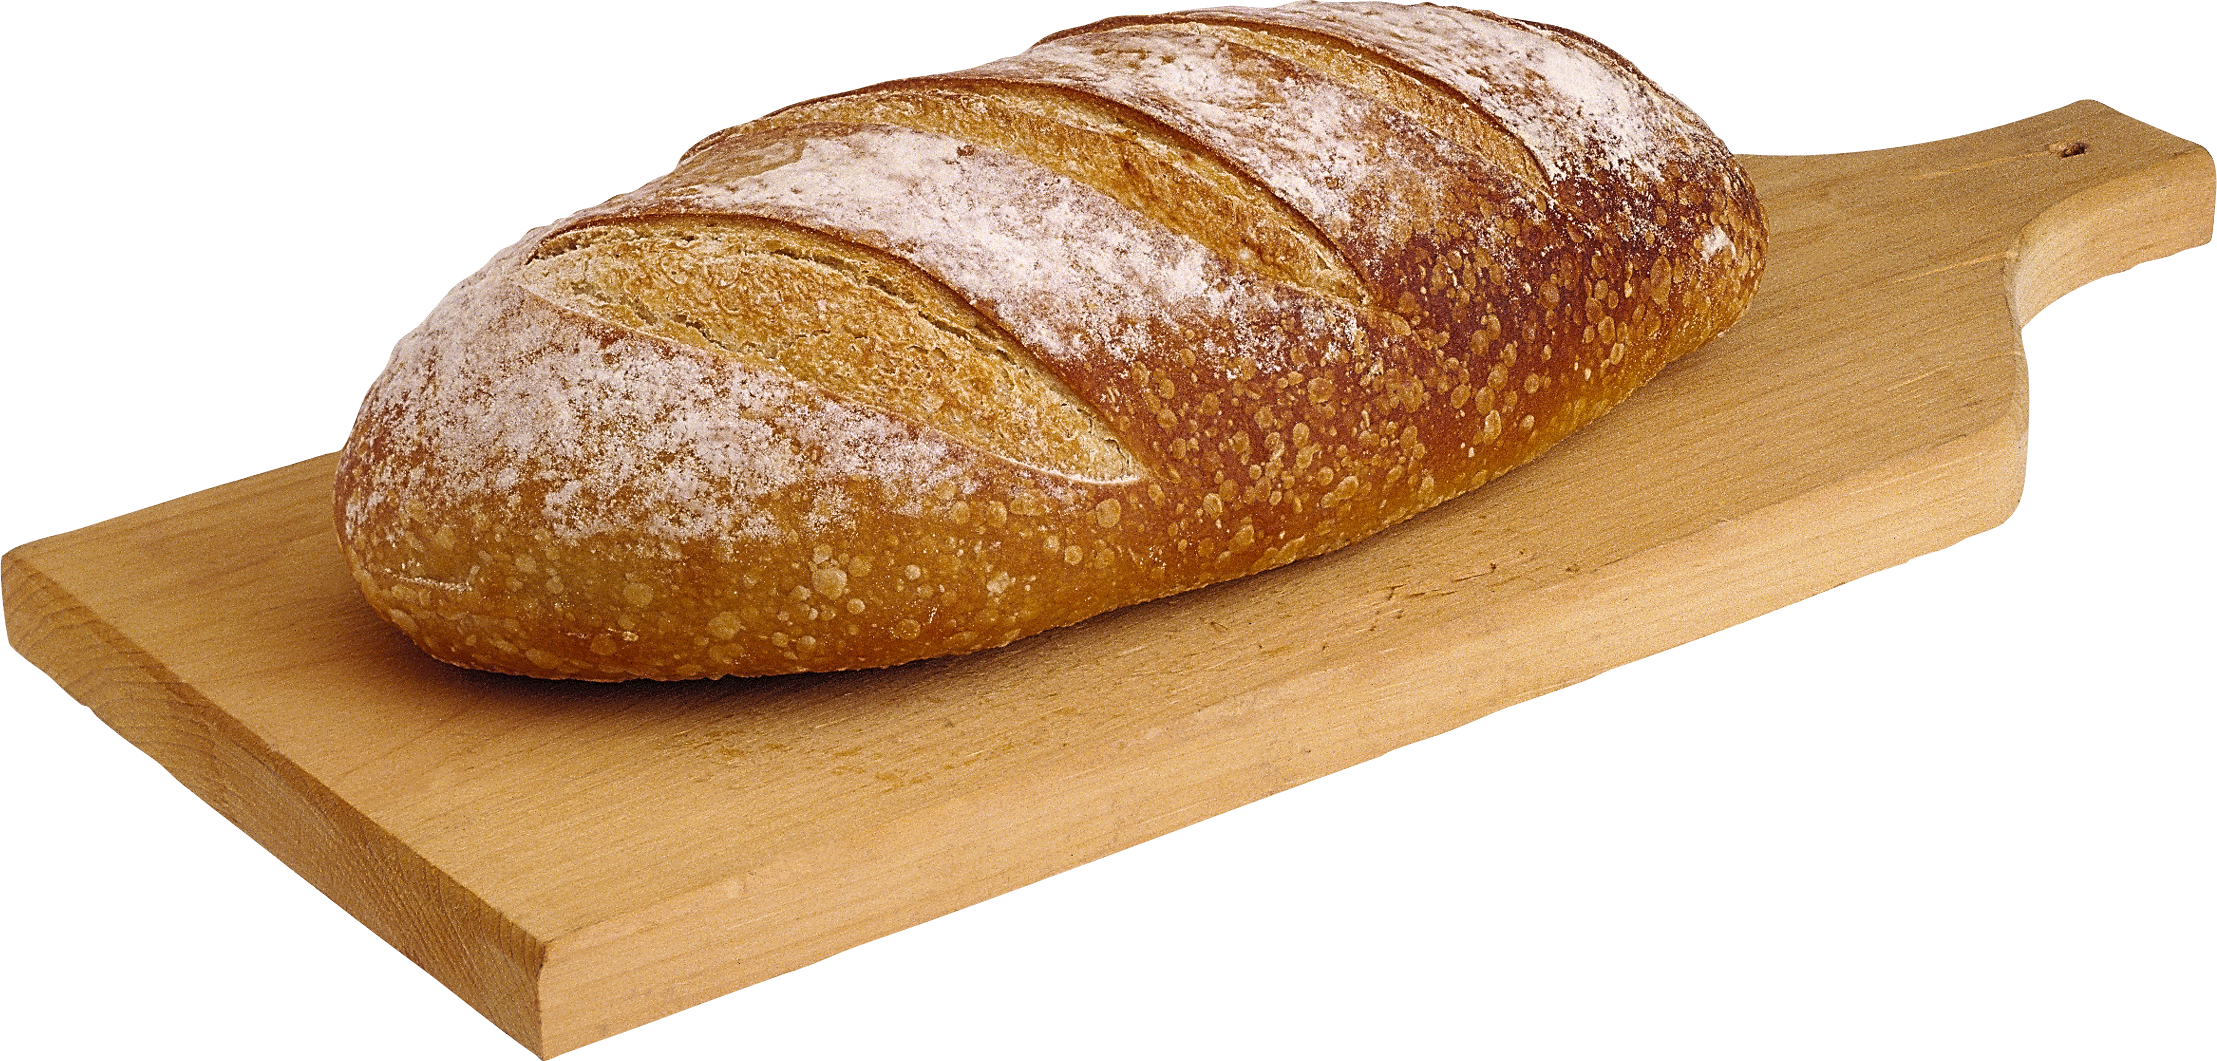 Download PNG image - Italian Bread PNG Transparent Image 